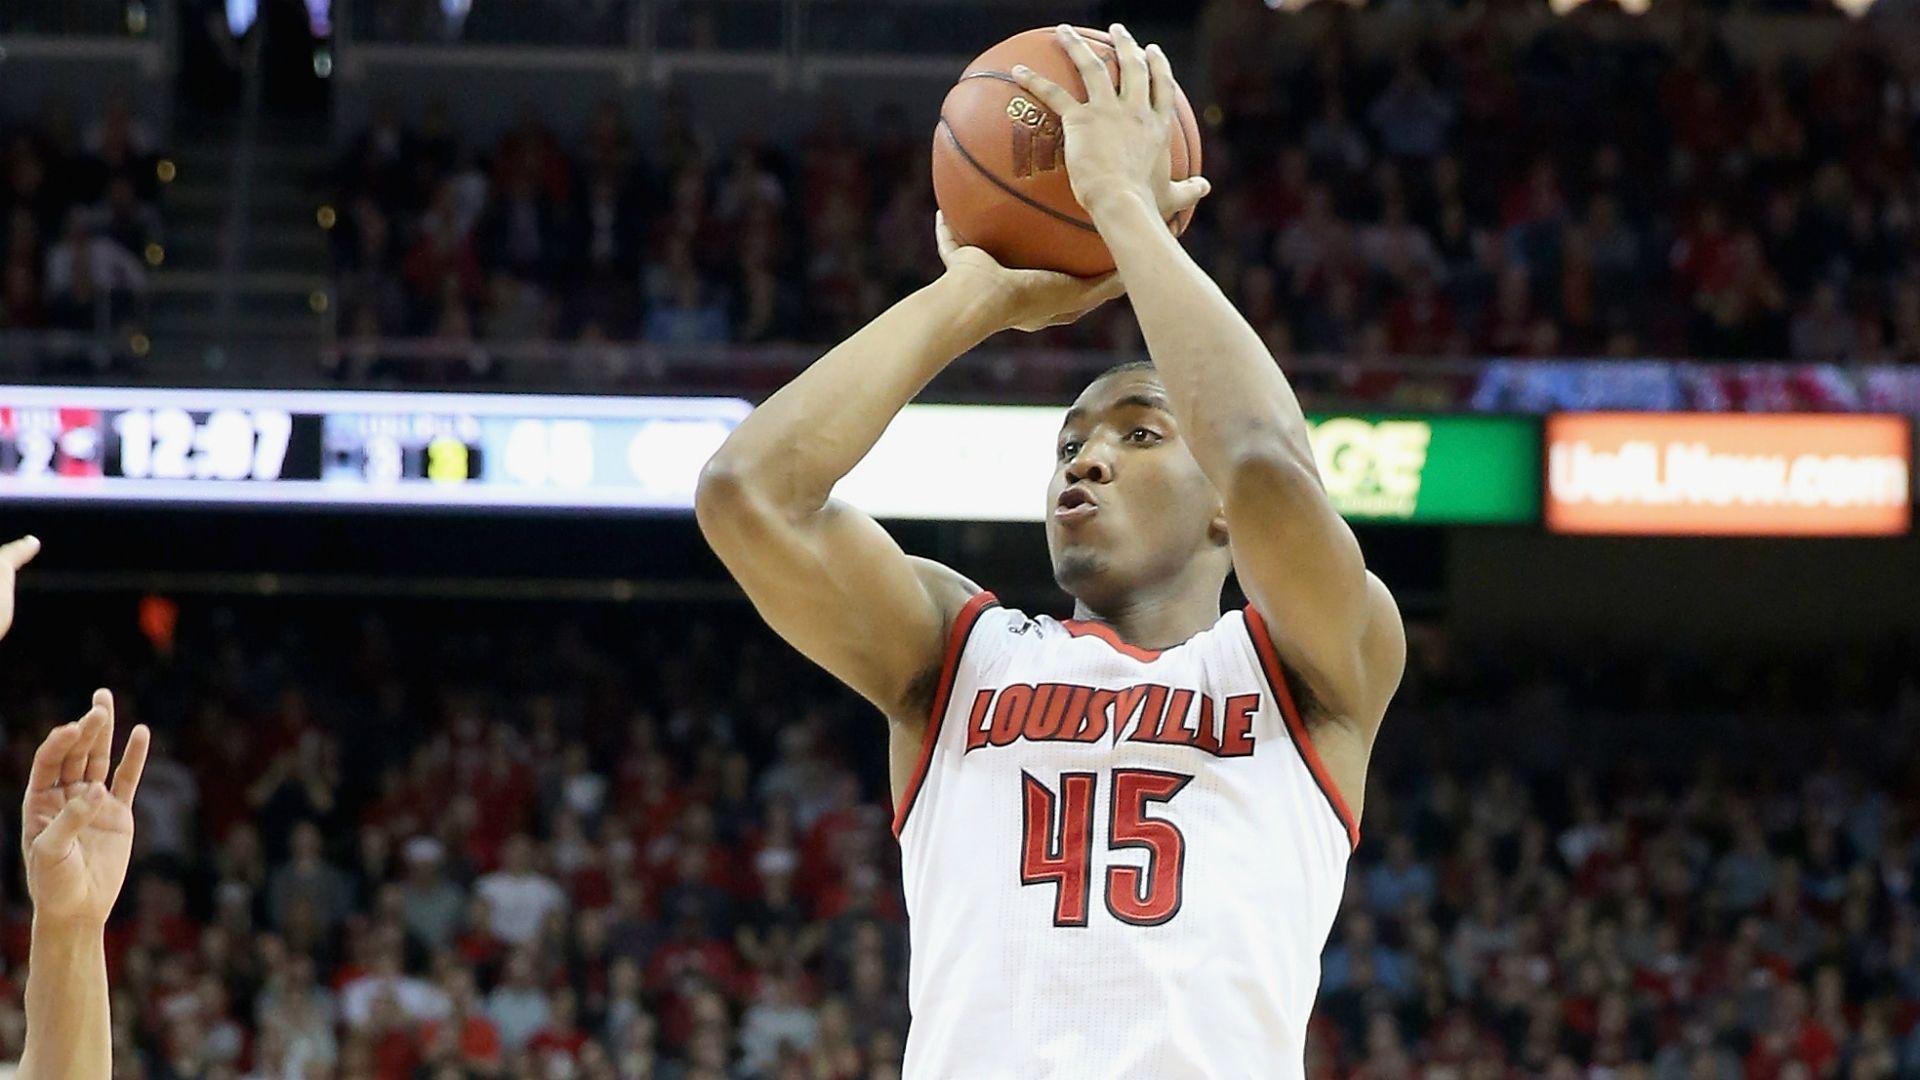 Louisville basketball's sophomores could take over NCAA, with NBA